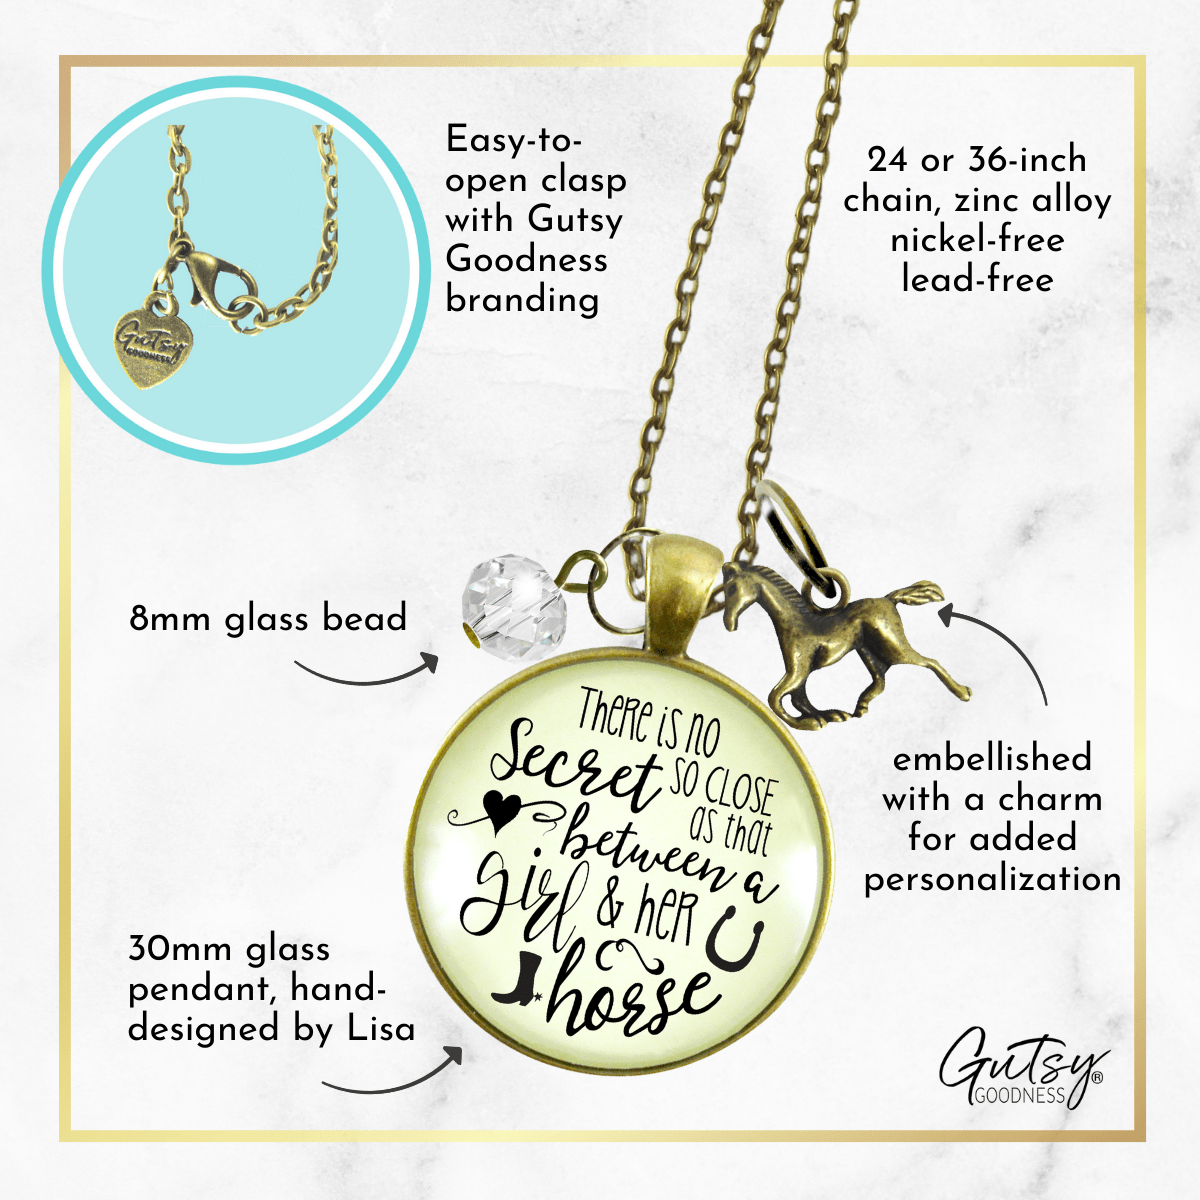 Gutsy Goodness Horse Necklace Equestrian Country Theme Quote Jewelry Galloping Charm - Gutsy Goodness Handmade Jewelry;Horse Necklace Equestrian Country Theme Quote Jewelry Galloping Charm - Gutsy Goodness Handmade Jewelry Gifts